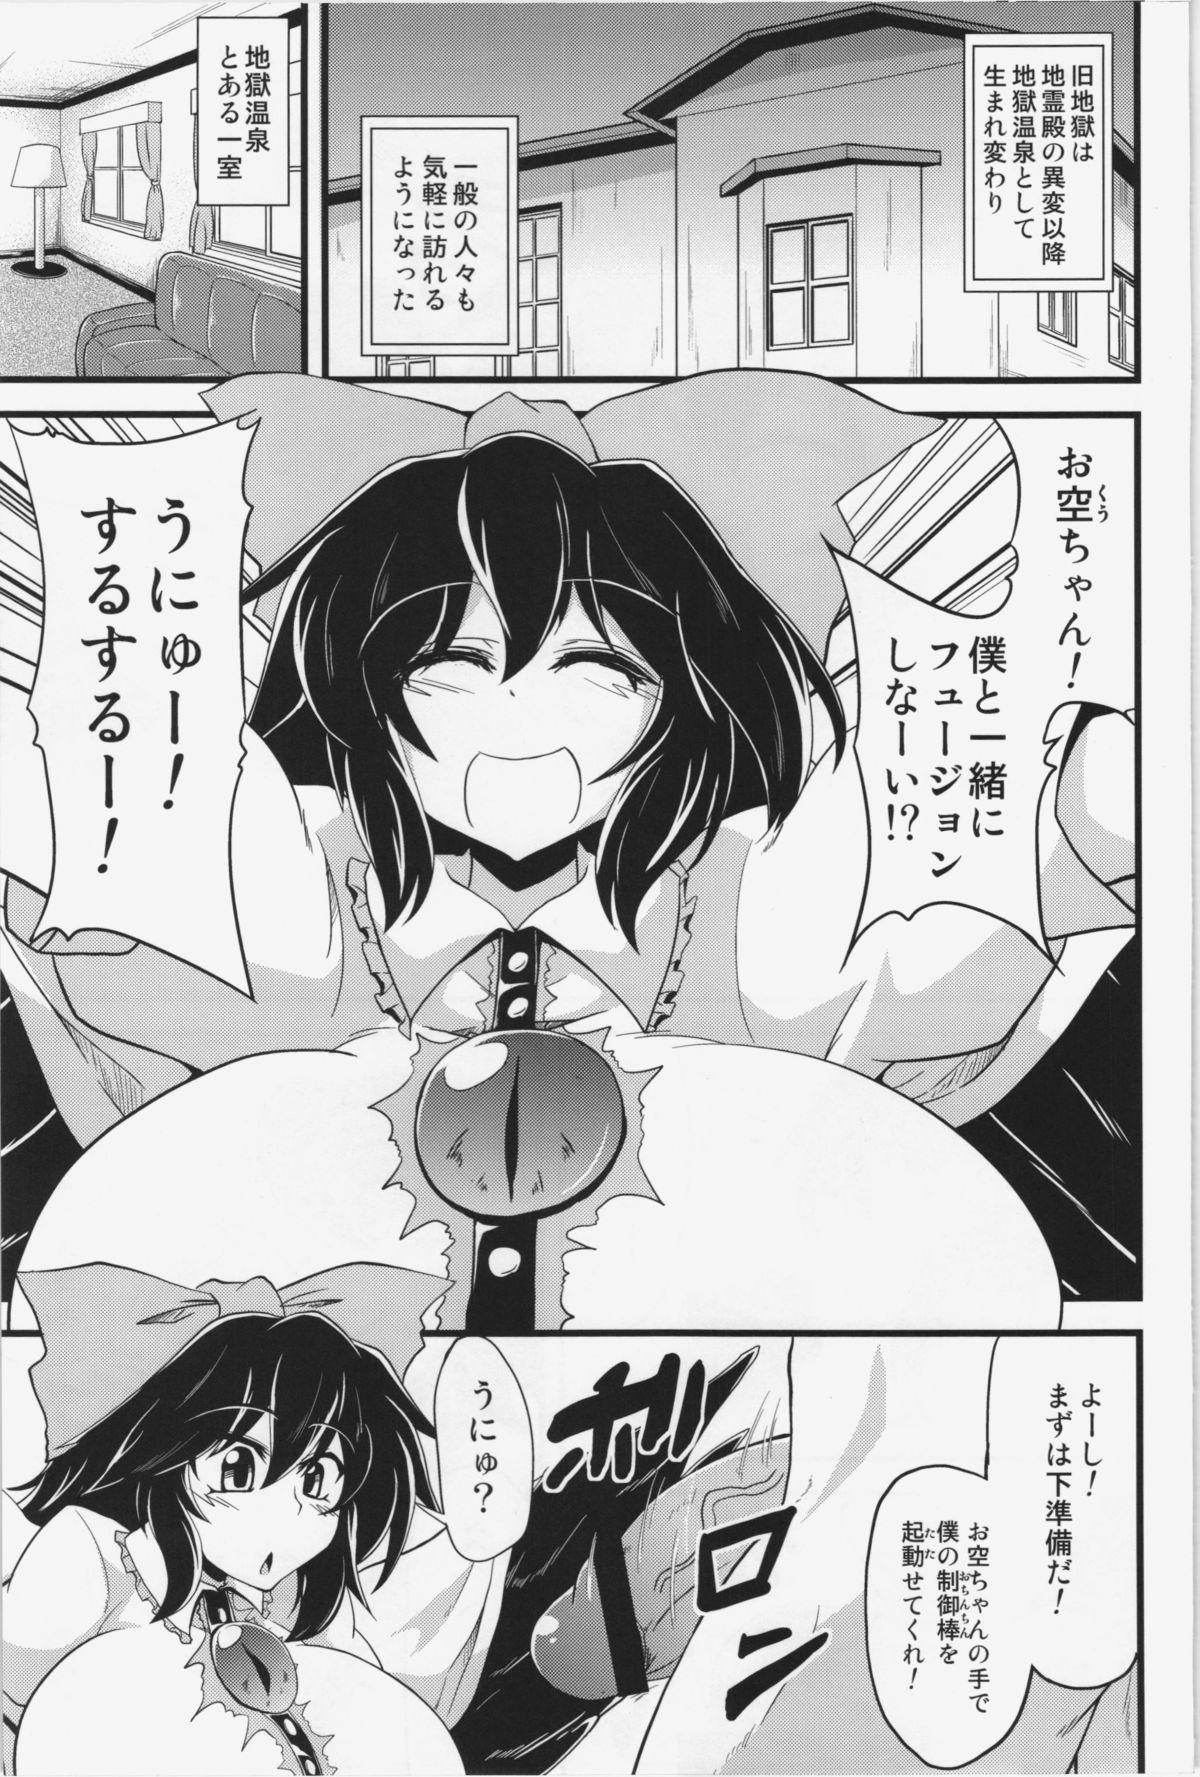 Teamskeet Let's Nuclear Fusion - Touhou project Scene - Page 3